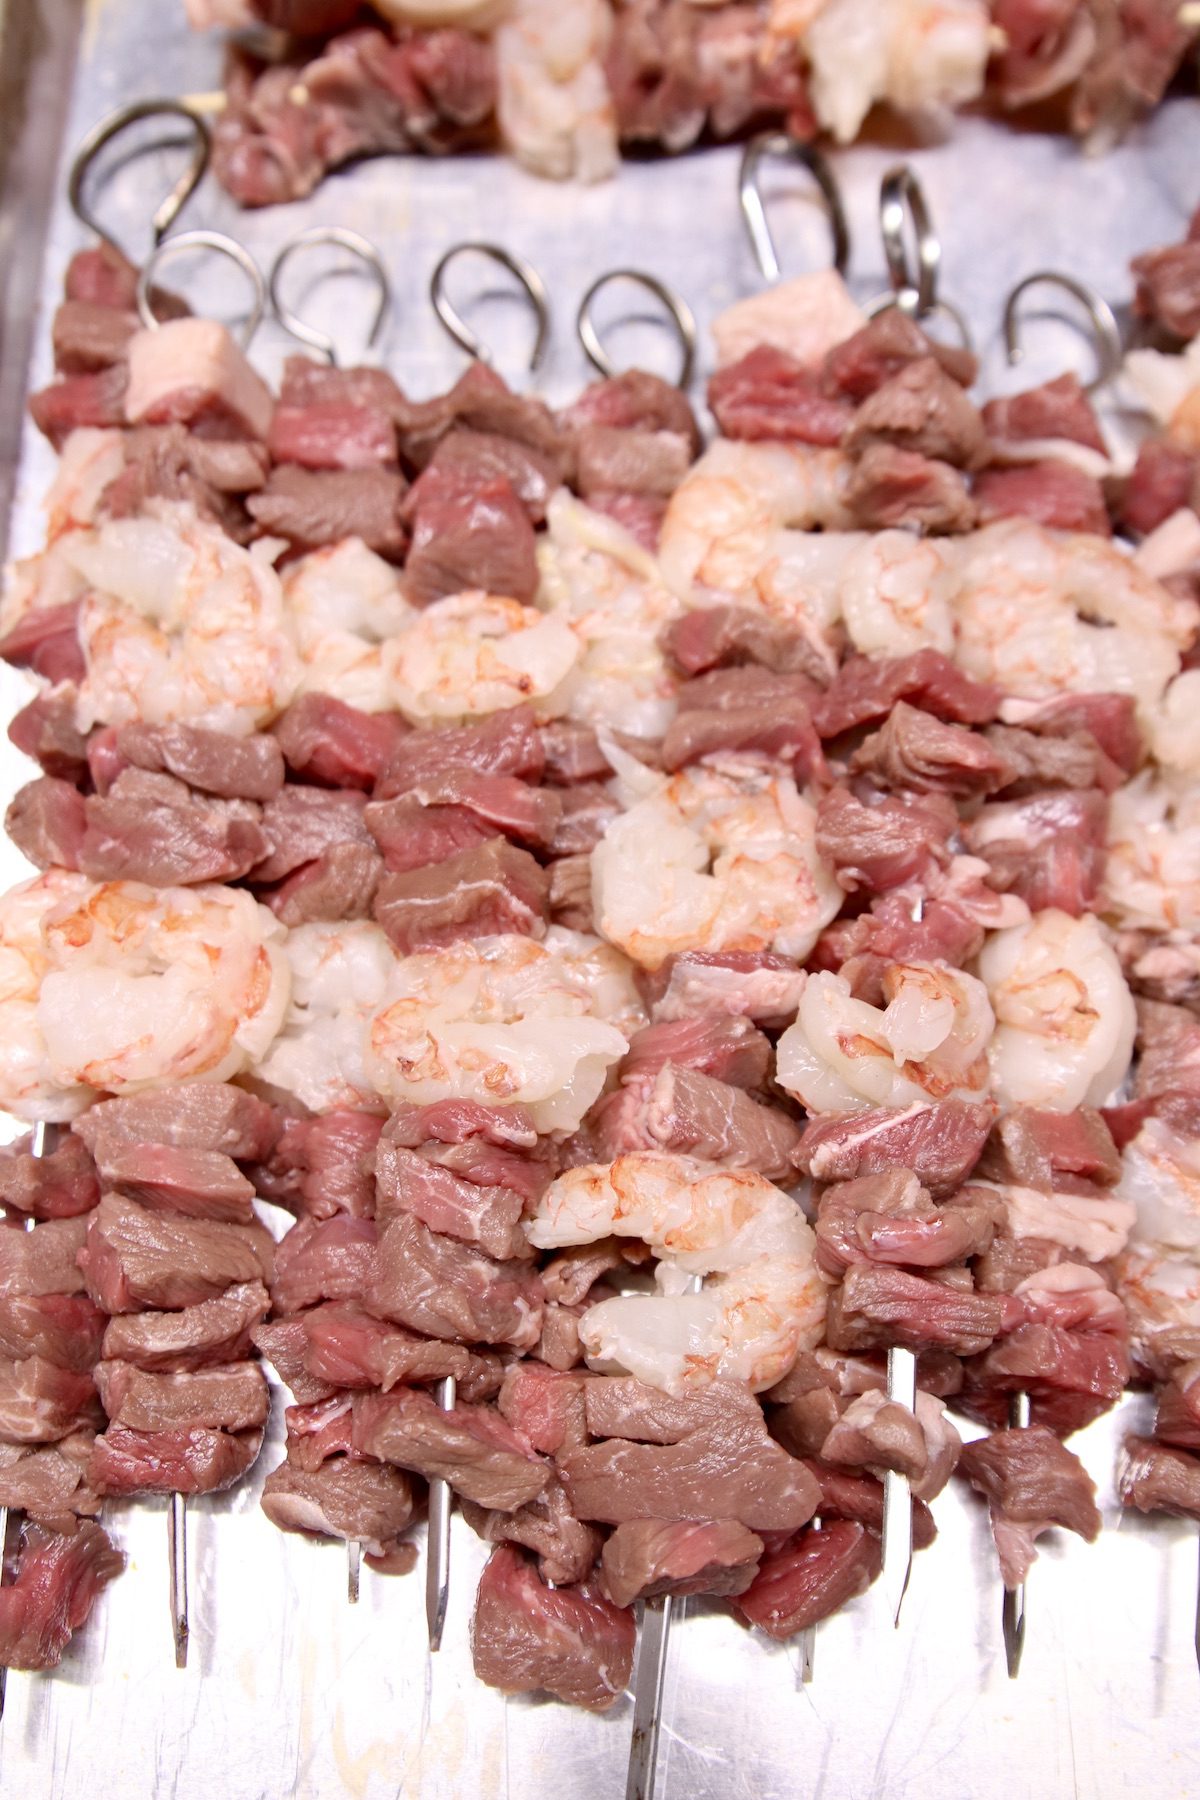 skewers with steak and shrimp